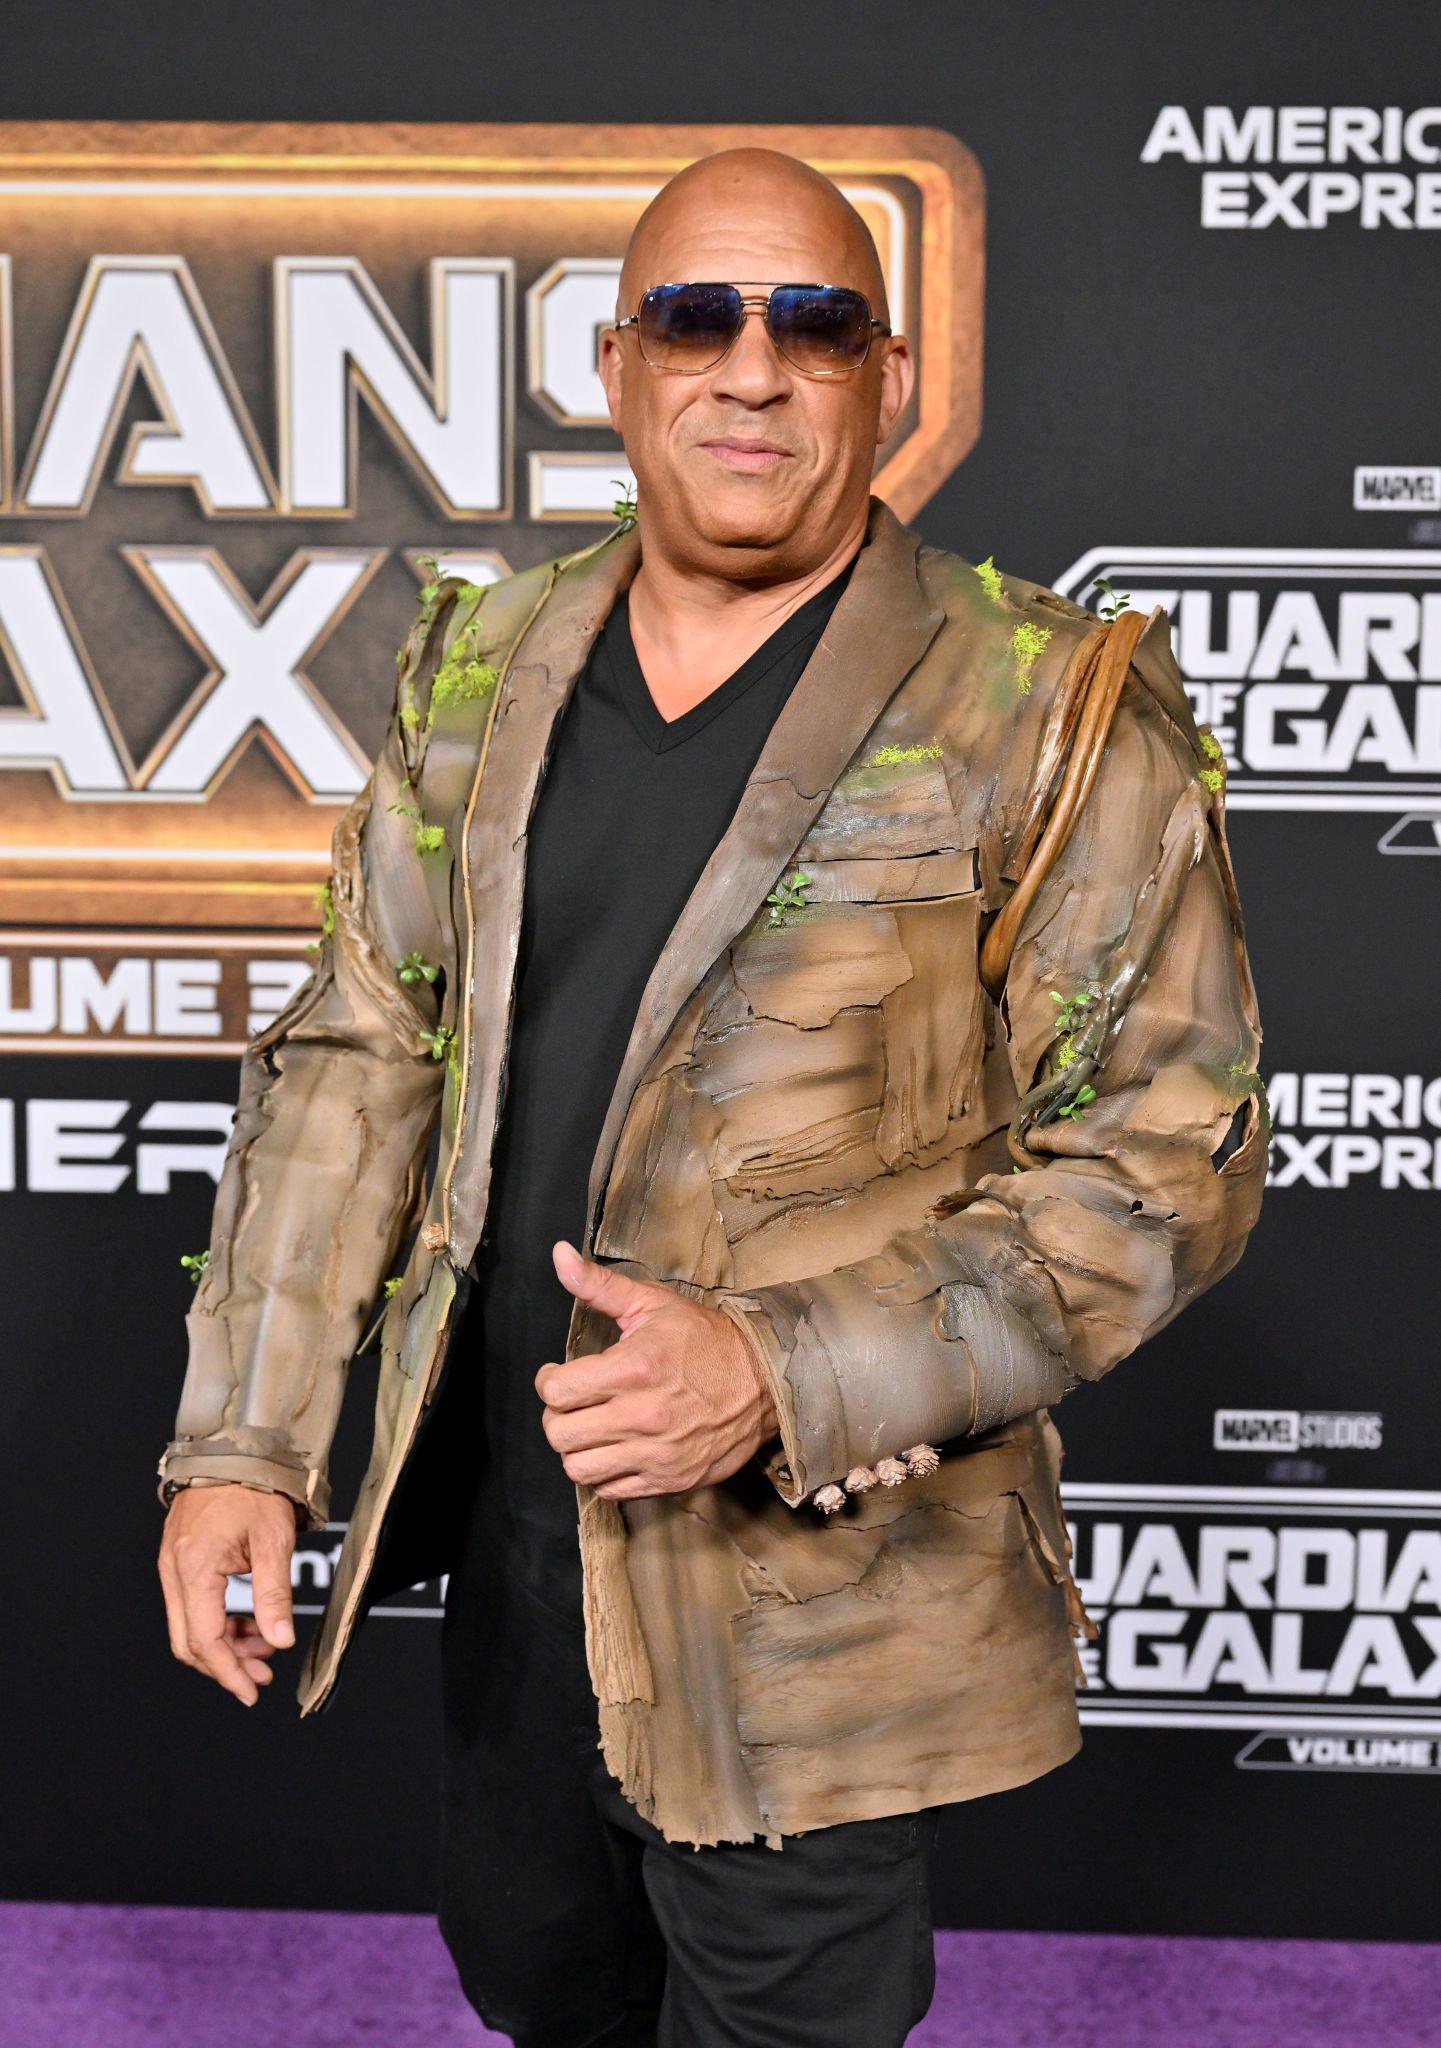 https://static.wikia.nocookie.net/marvelcinematicuniverse/images/a/a3/Vin_Diesel.jpg/revision/latest?cb=20230428133624